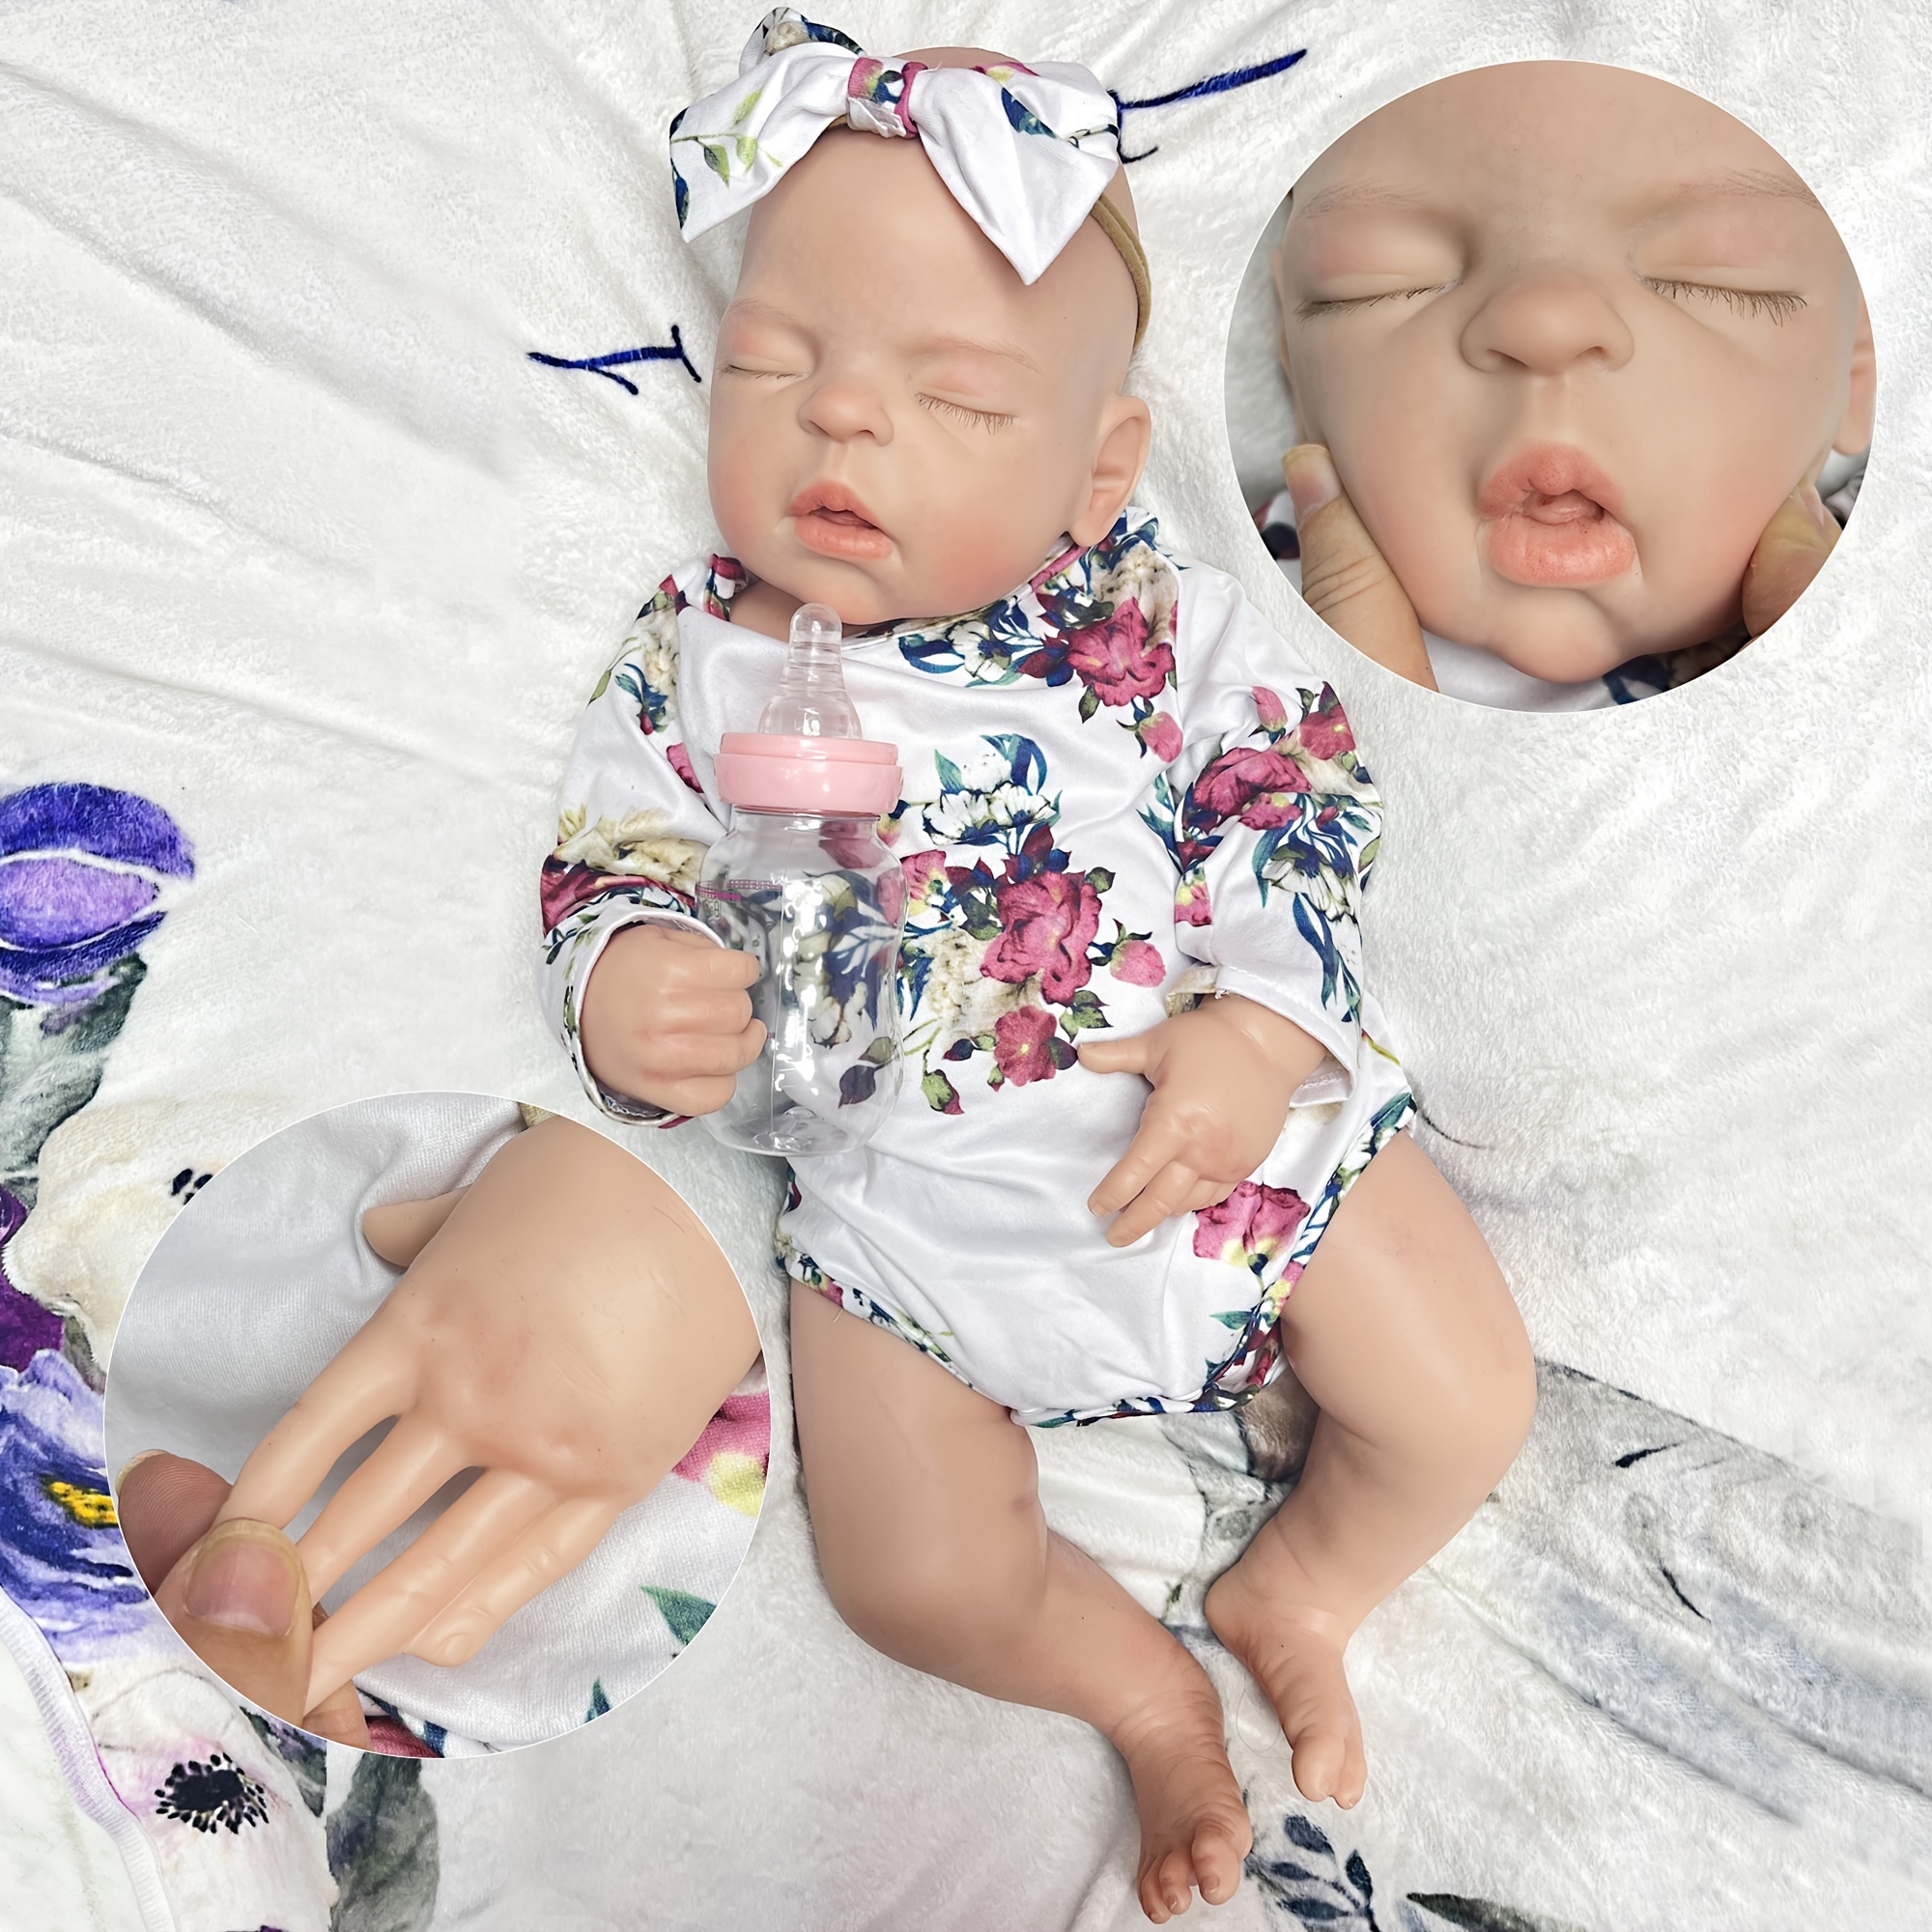 22 Inch/55cm All Silicone Big Sleeping Girl Reborn Doll - A Lifelike Full  Body Soft Solid Silicone Newborn Baby Doll Perfect for Collection Gift  Halloween/Thanksgiving Day/Christmas gift